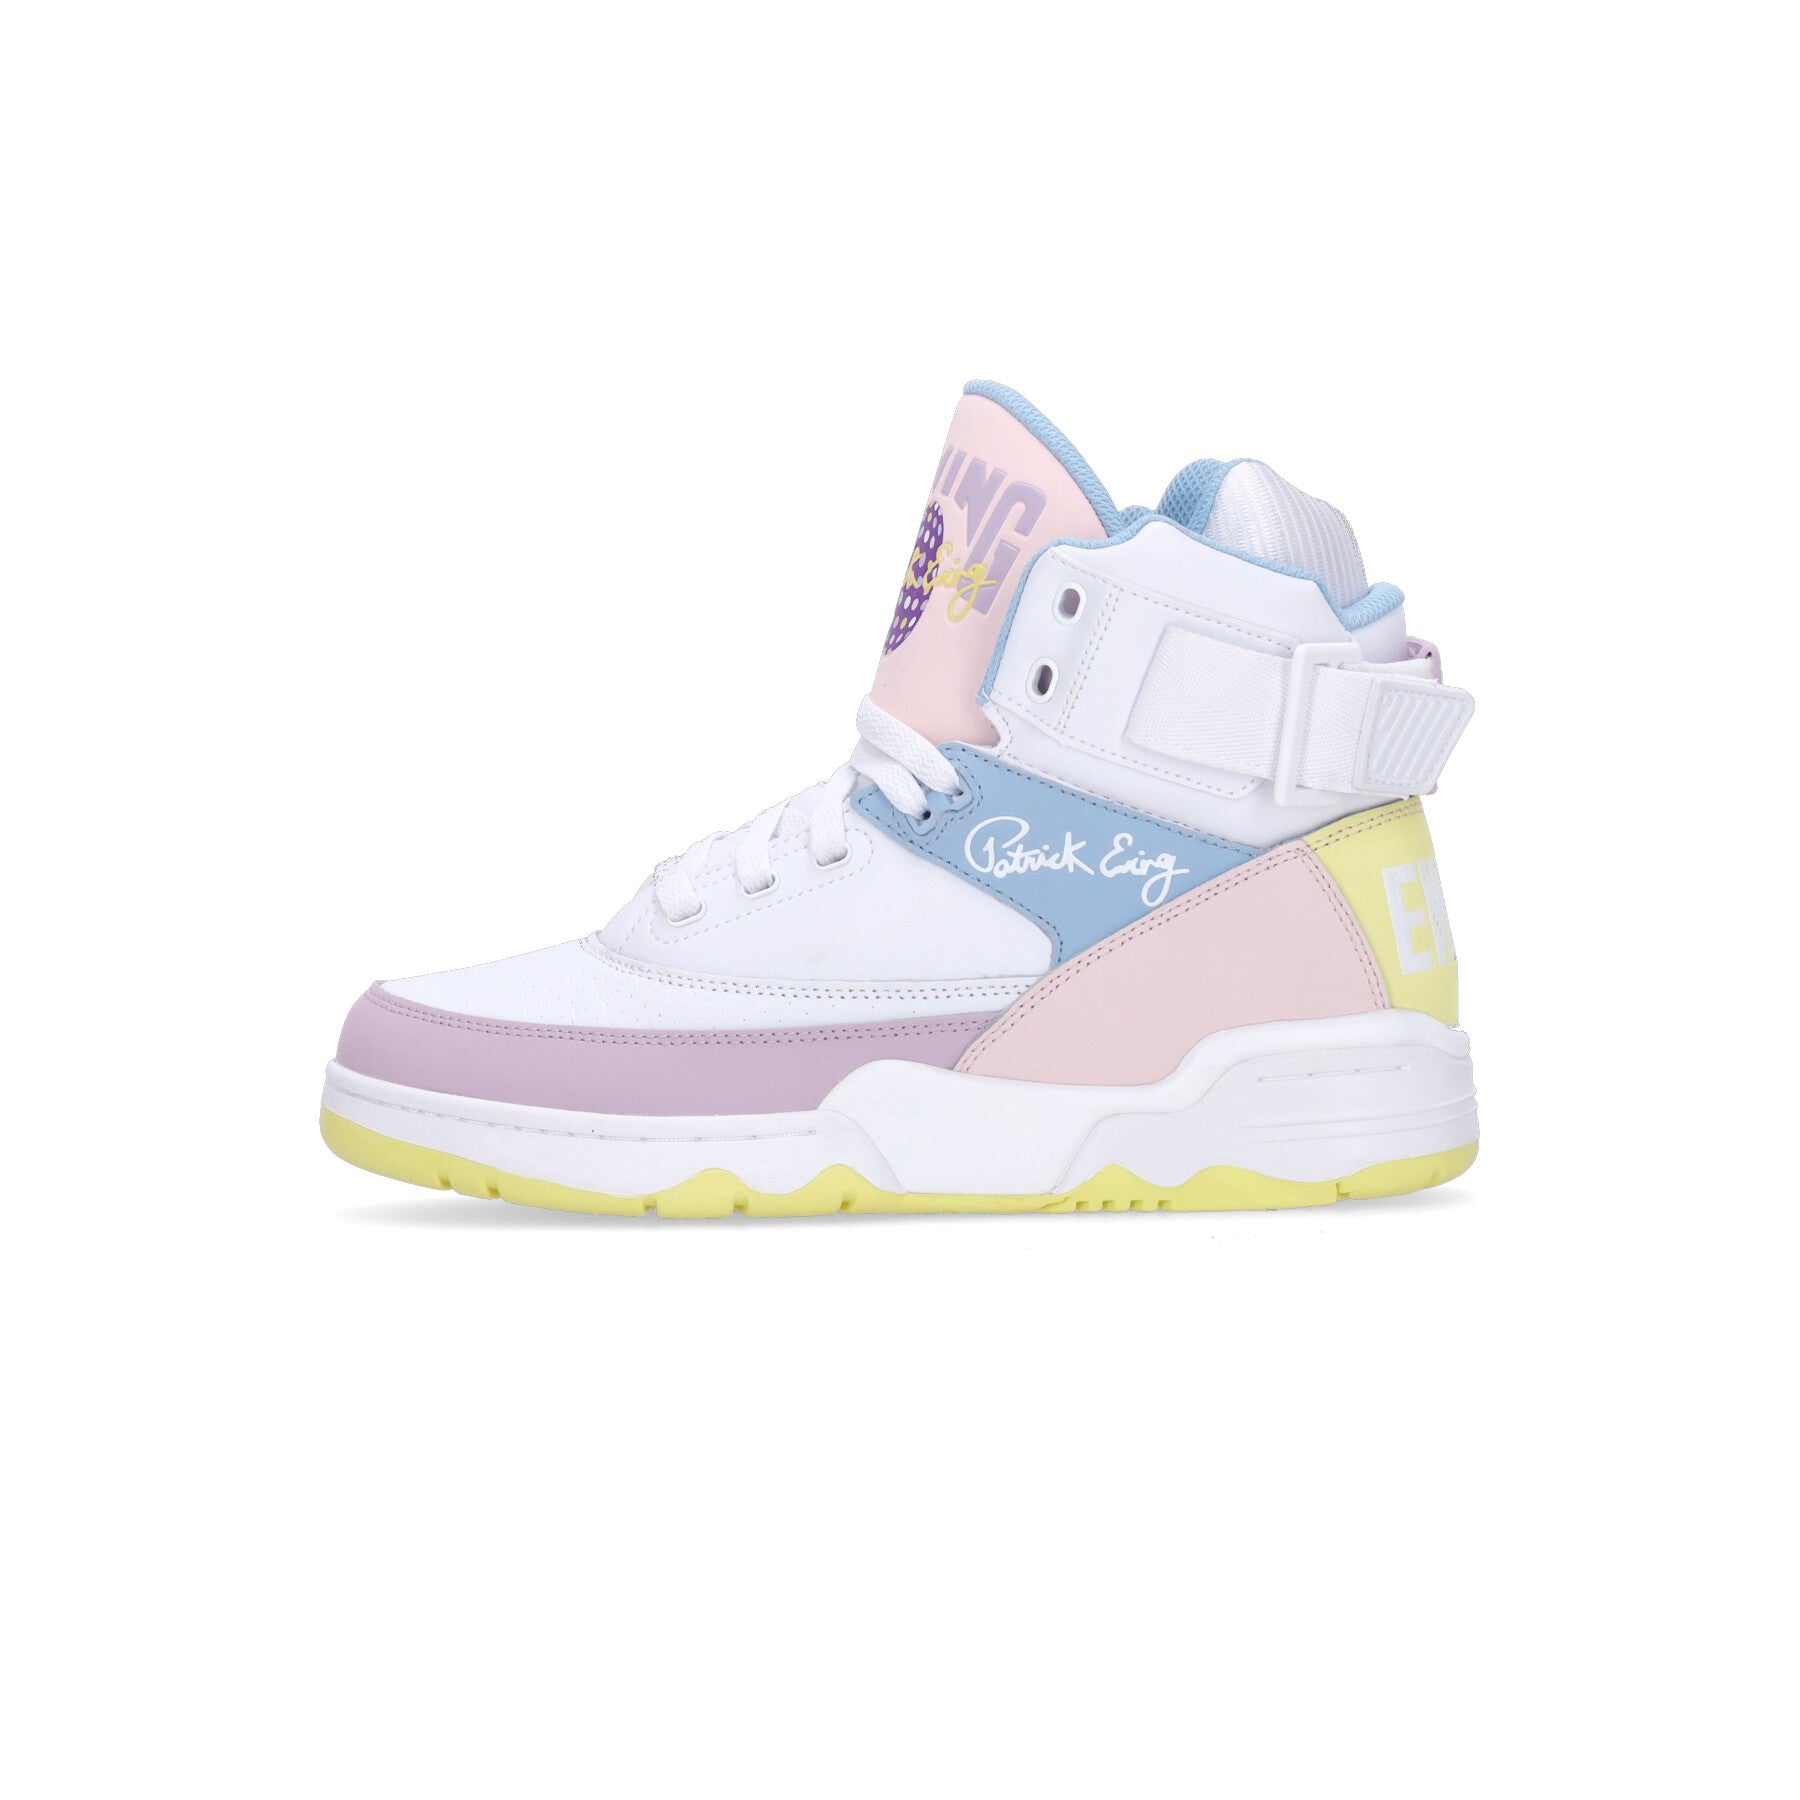 Ewing Athletics, Scarpa Basket Uomo Ewing 33 Hi Eastern, White/winsome Orchid/limelight